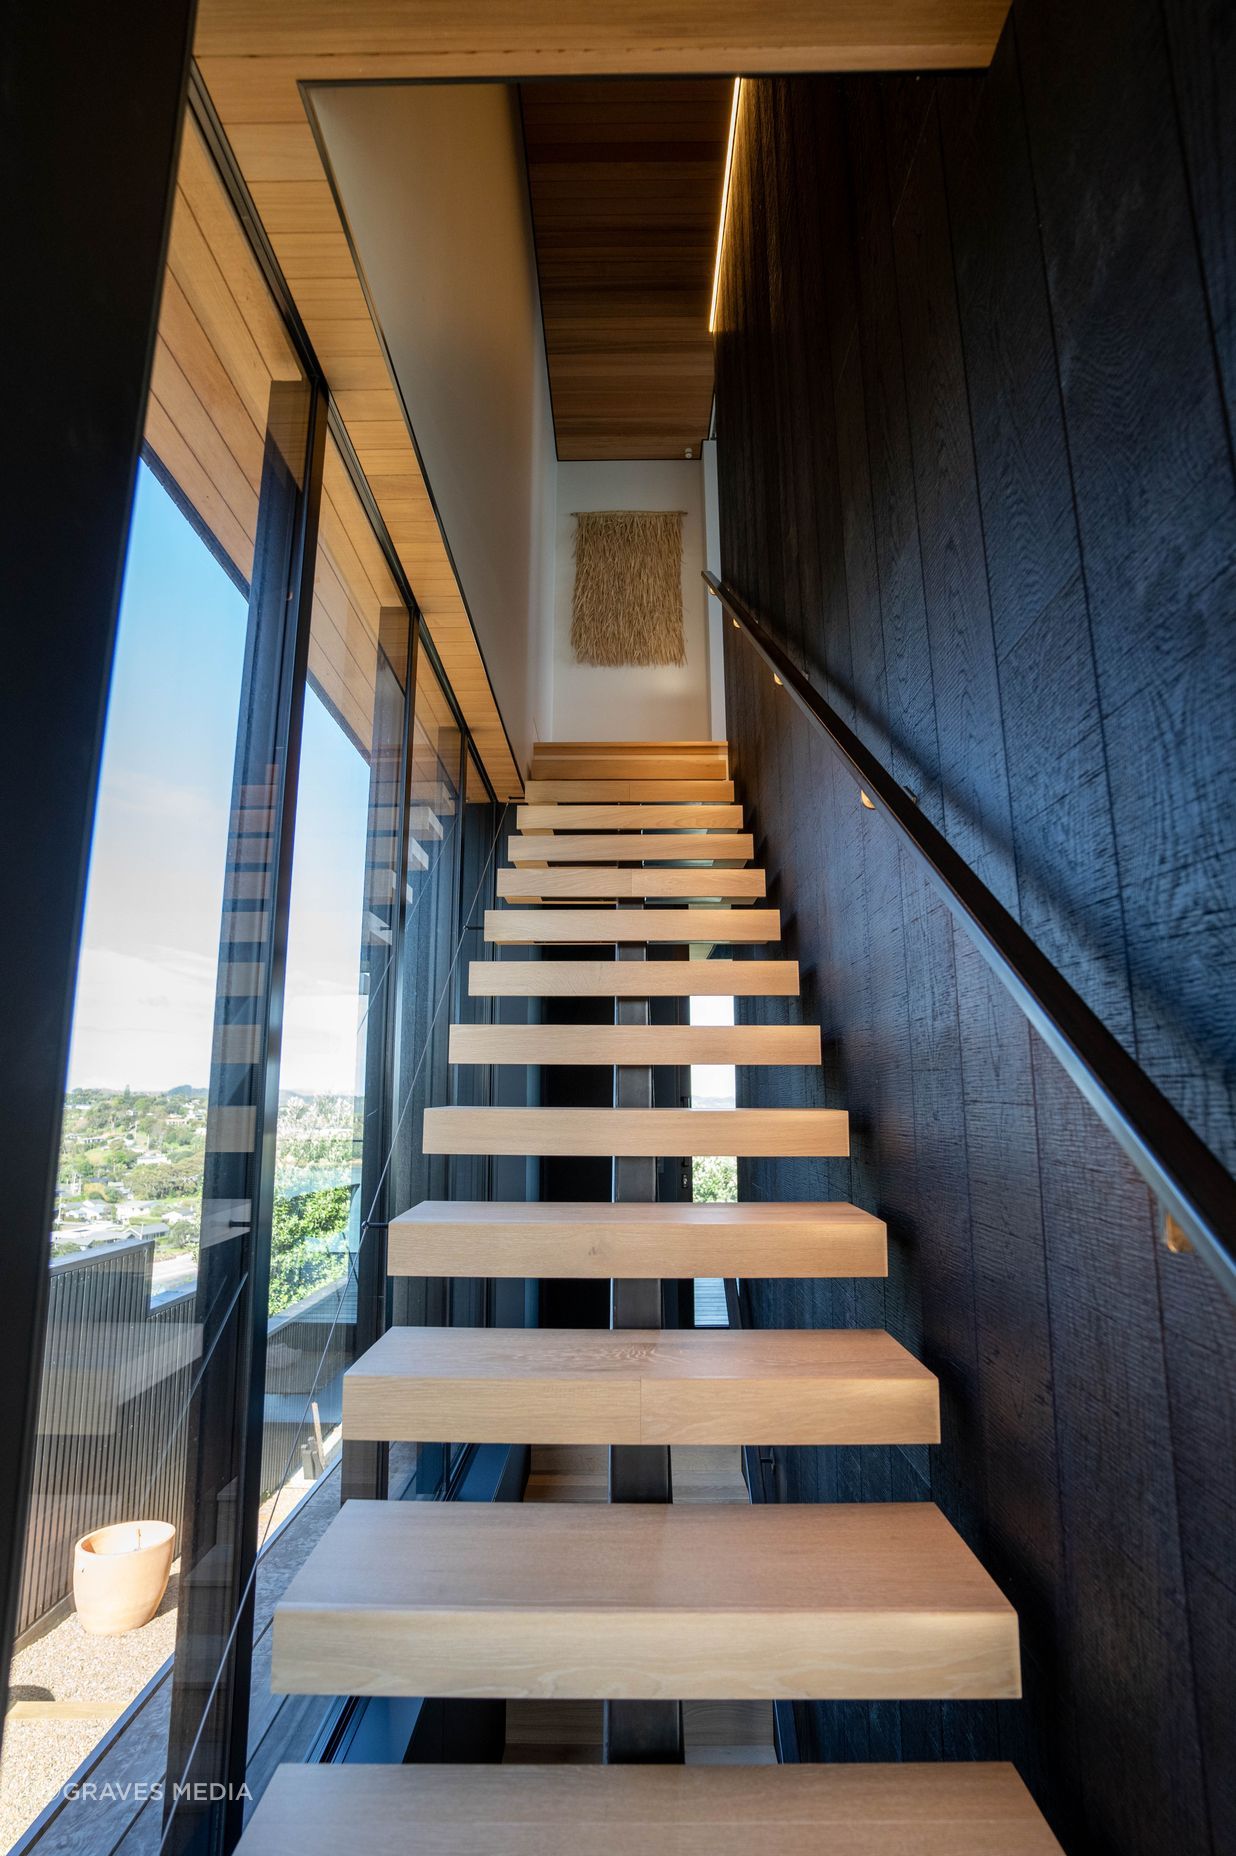 Floating oak stairs run from the basement to the master suite on the top floor.